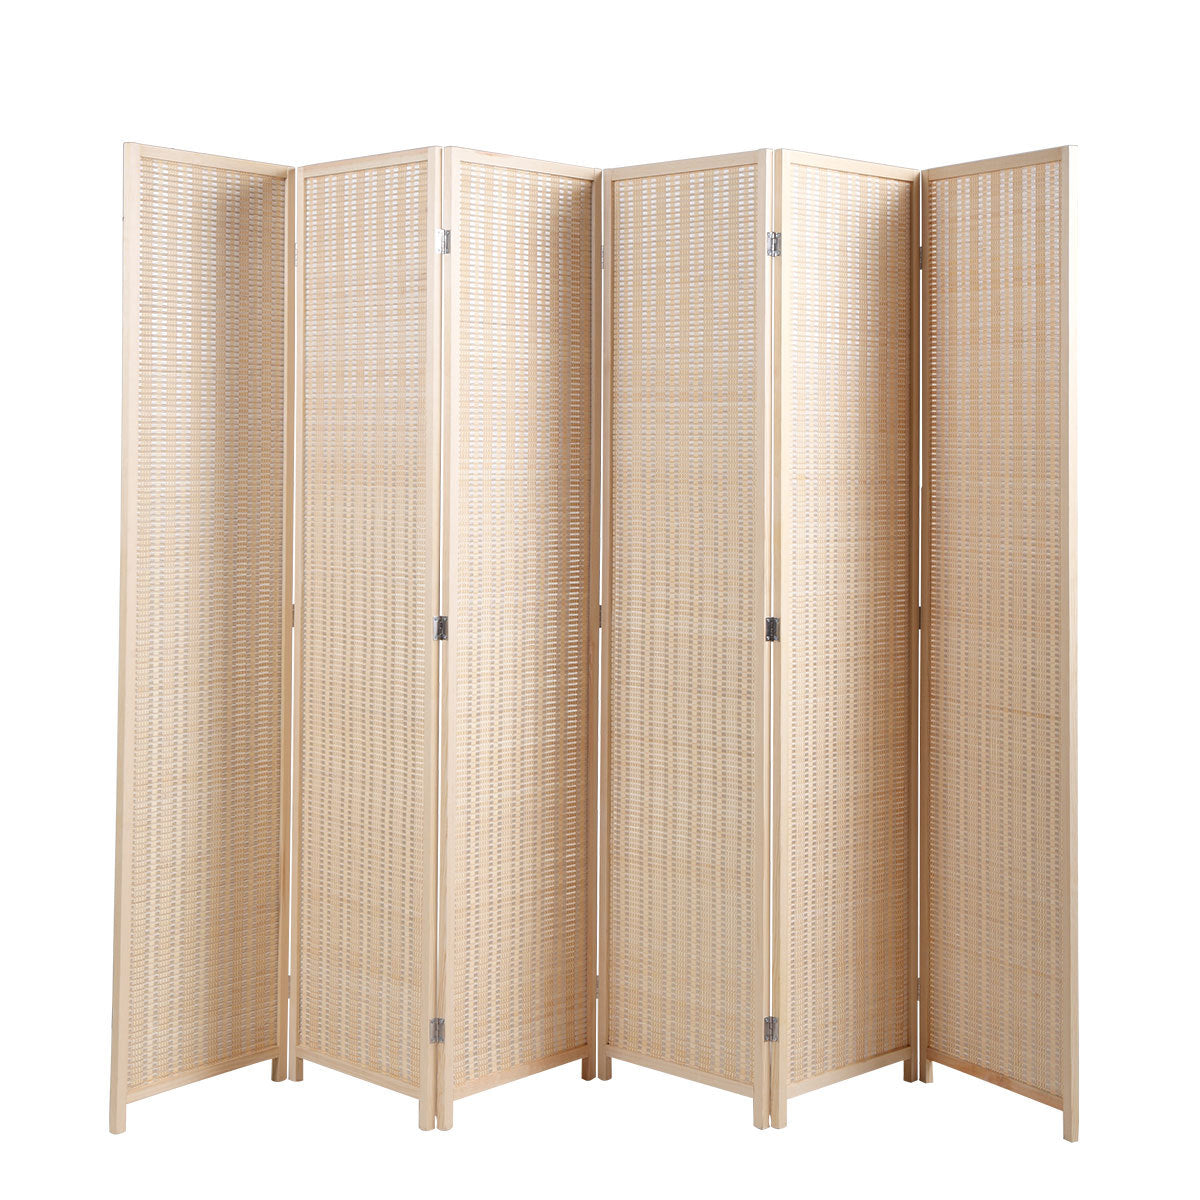 6 Panel Bamboo Room Divider, Private Folding